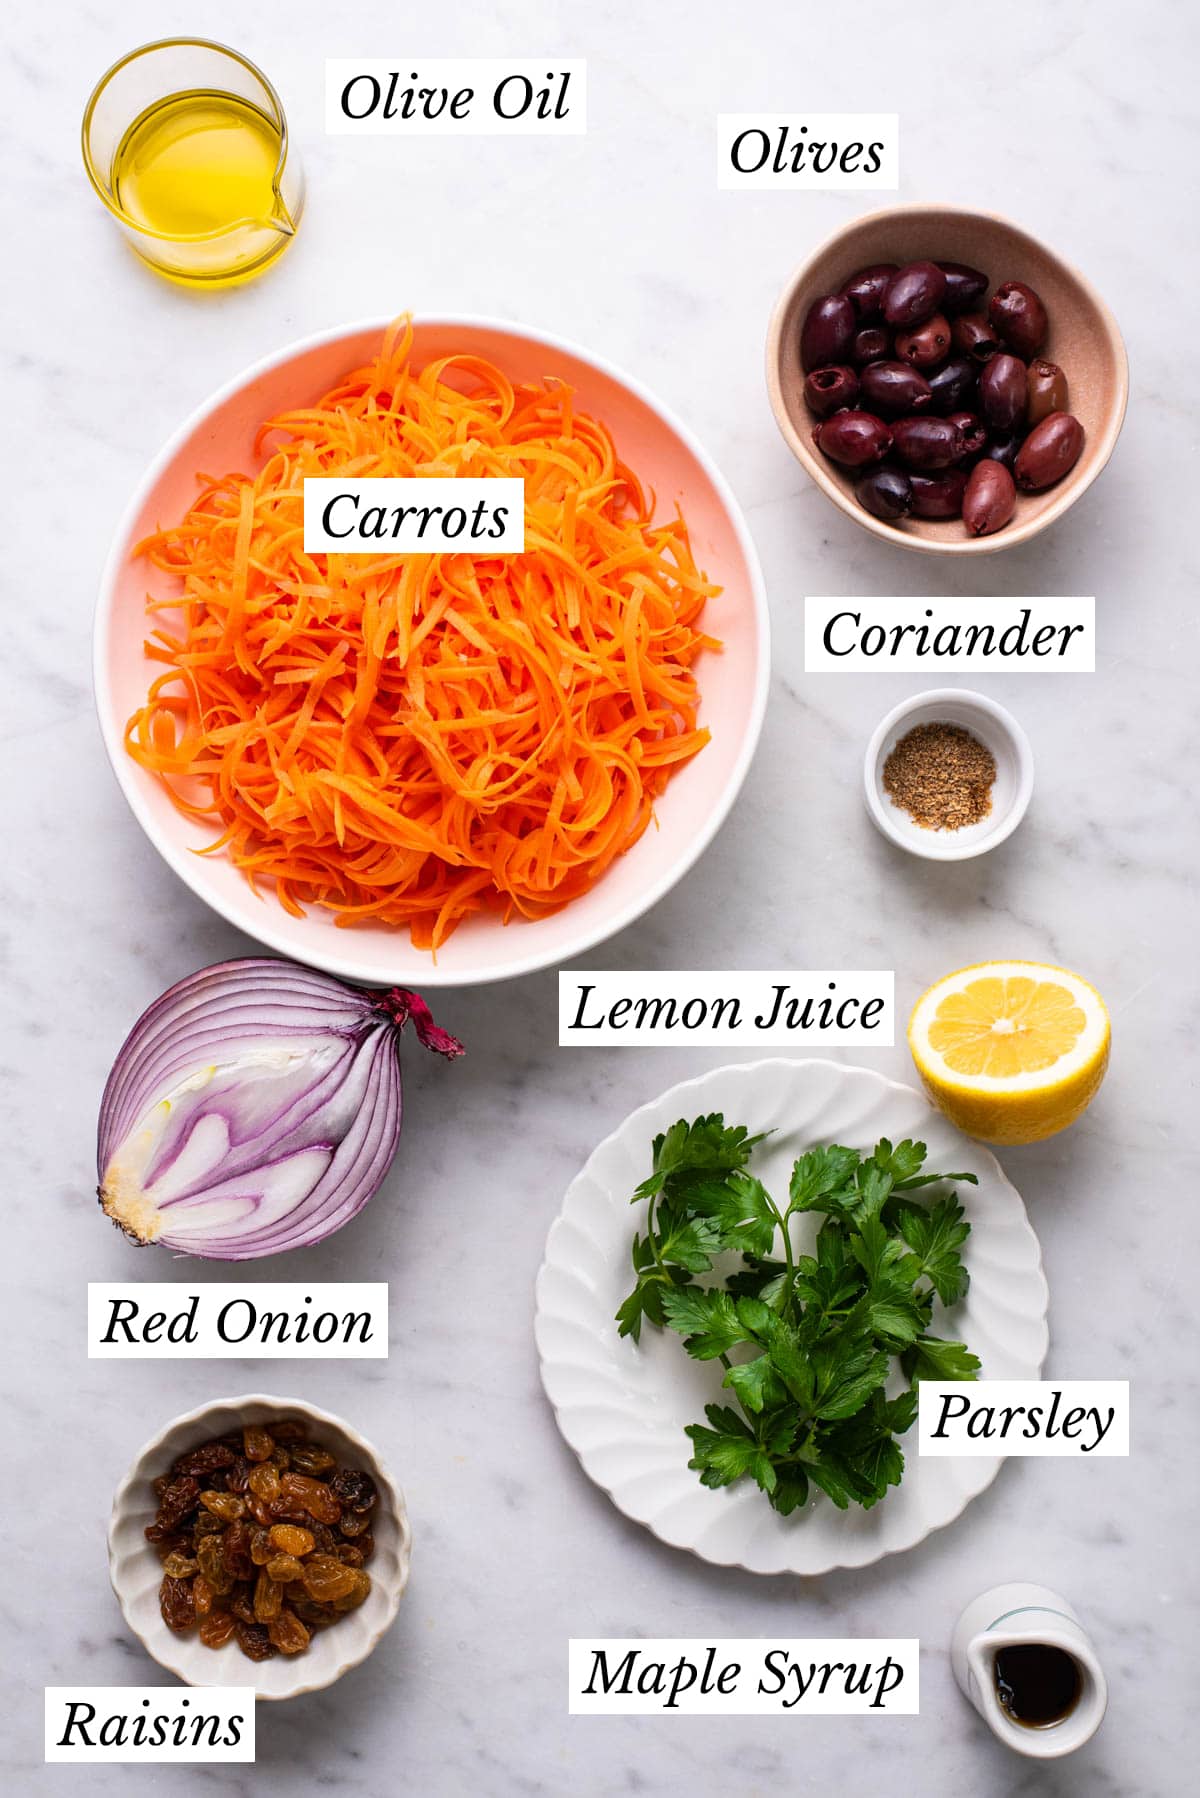 Ingredients gathered to make raw shredded carrot salad with raisins and olives.